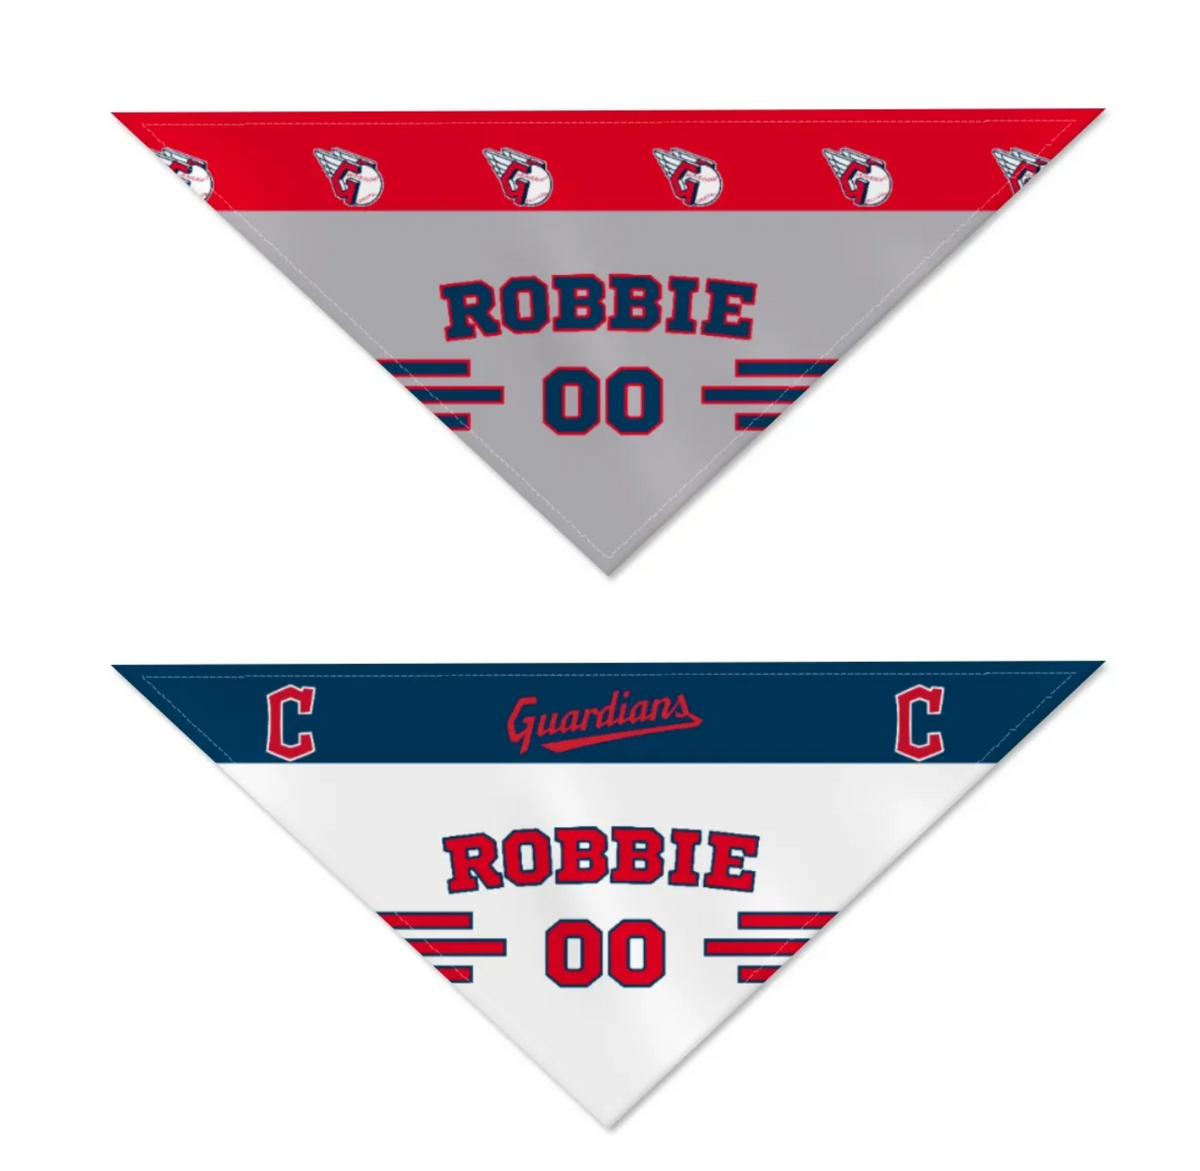 Cleveland Guardians Home/Road Personalized Reversible Bandana - 3 Red Rovers